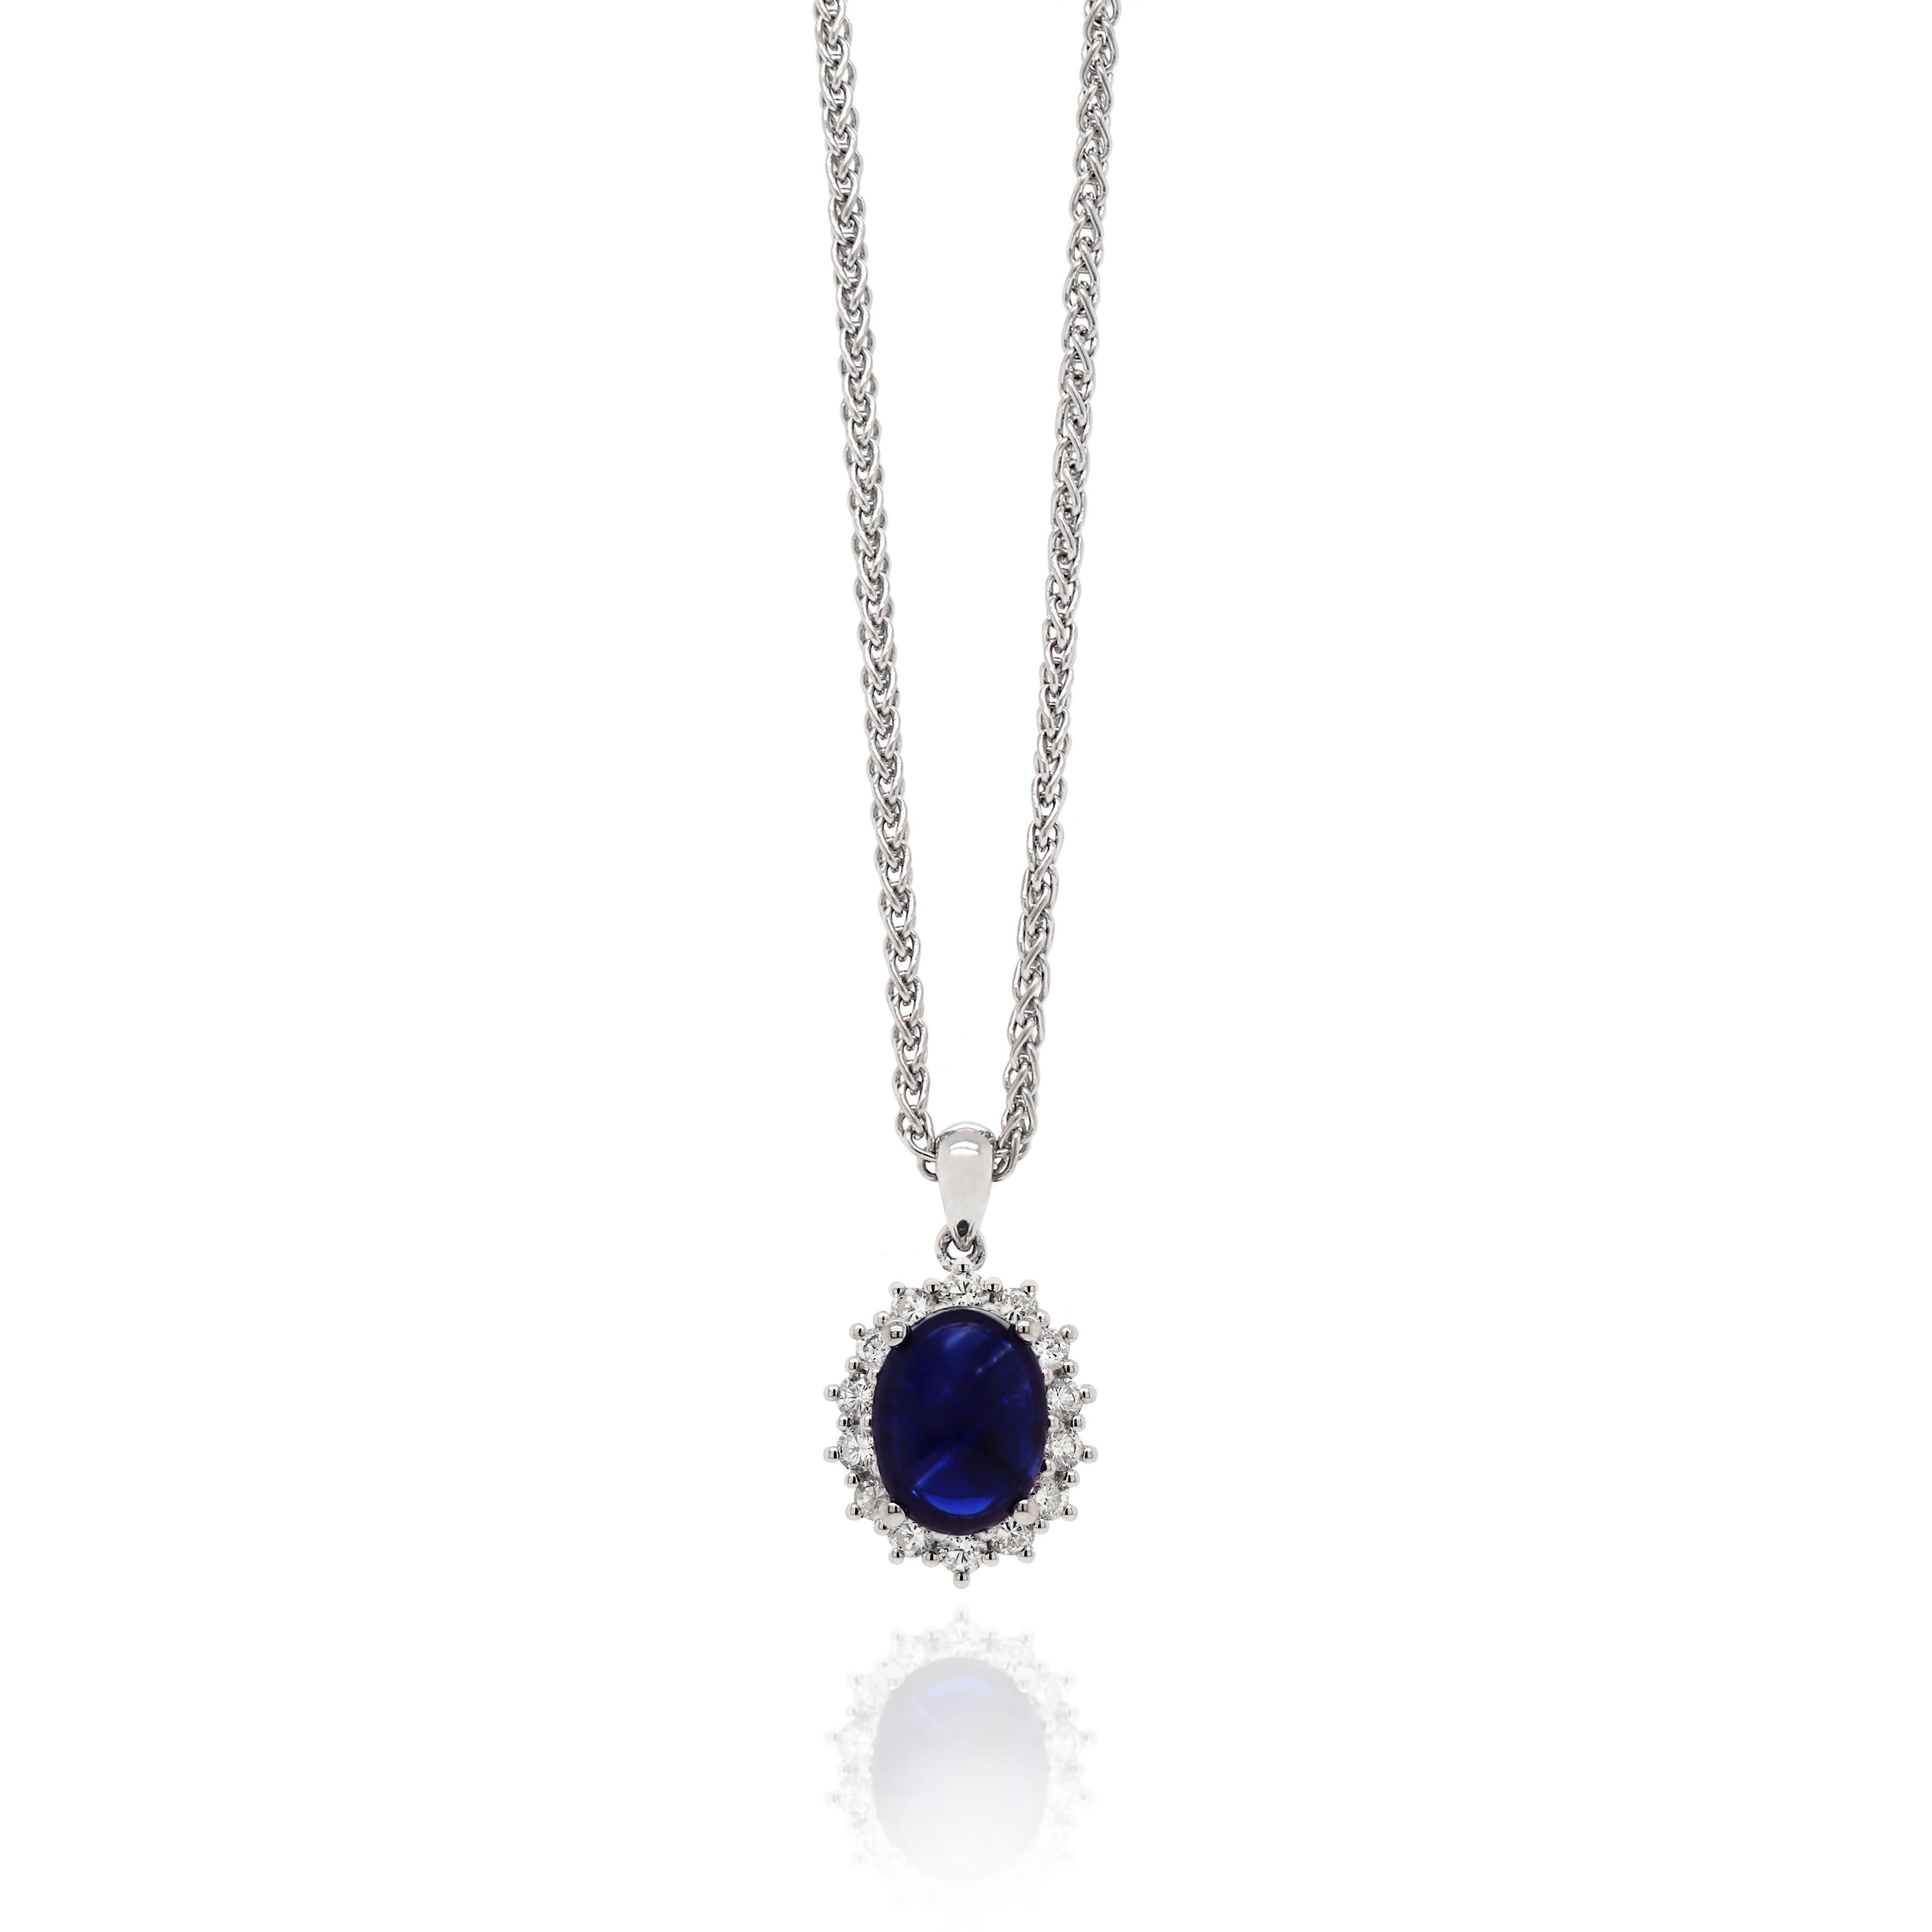 A beautiful pendant featuring a rich blue oval cabochon sapphire in a four claw open back setting weighing 3.37ct. The sapphire is further surrounded by 14 claw set round brilliant cut diamonds weighing a total of 0.49ct all mounted in 18ct white